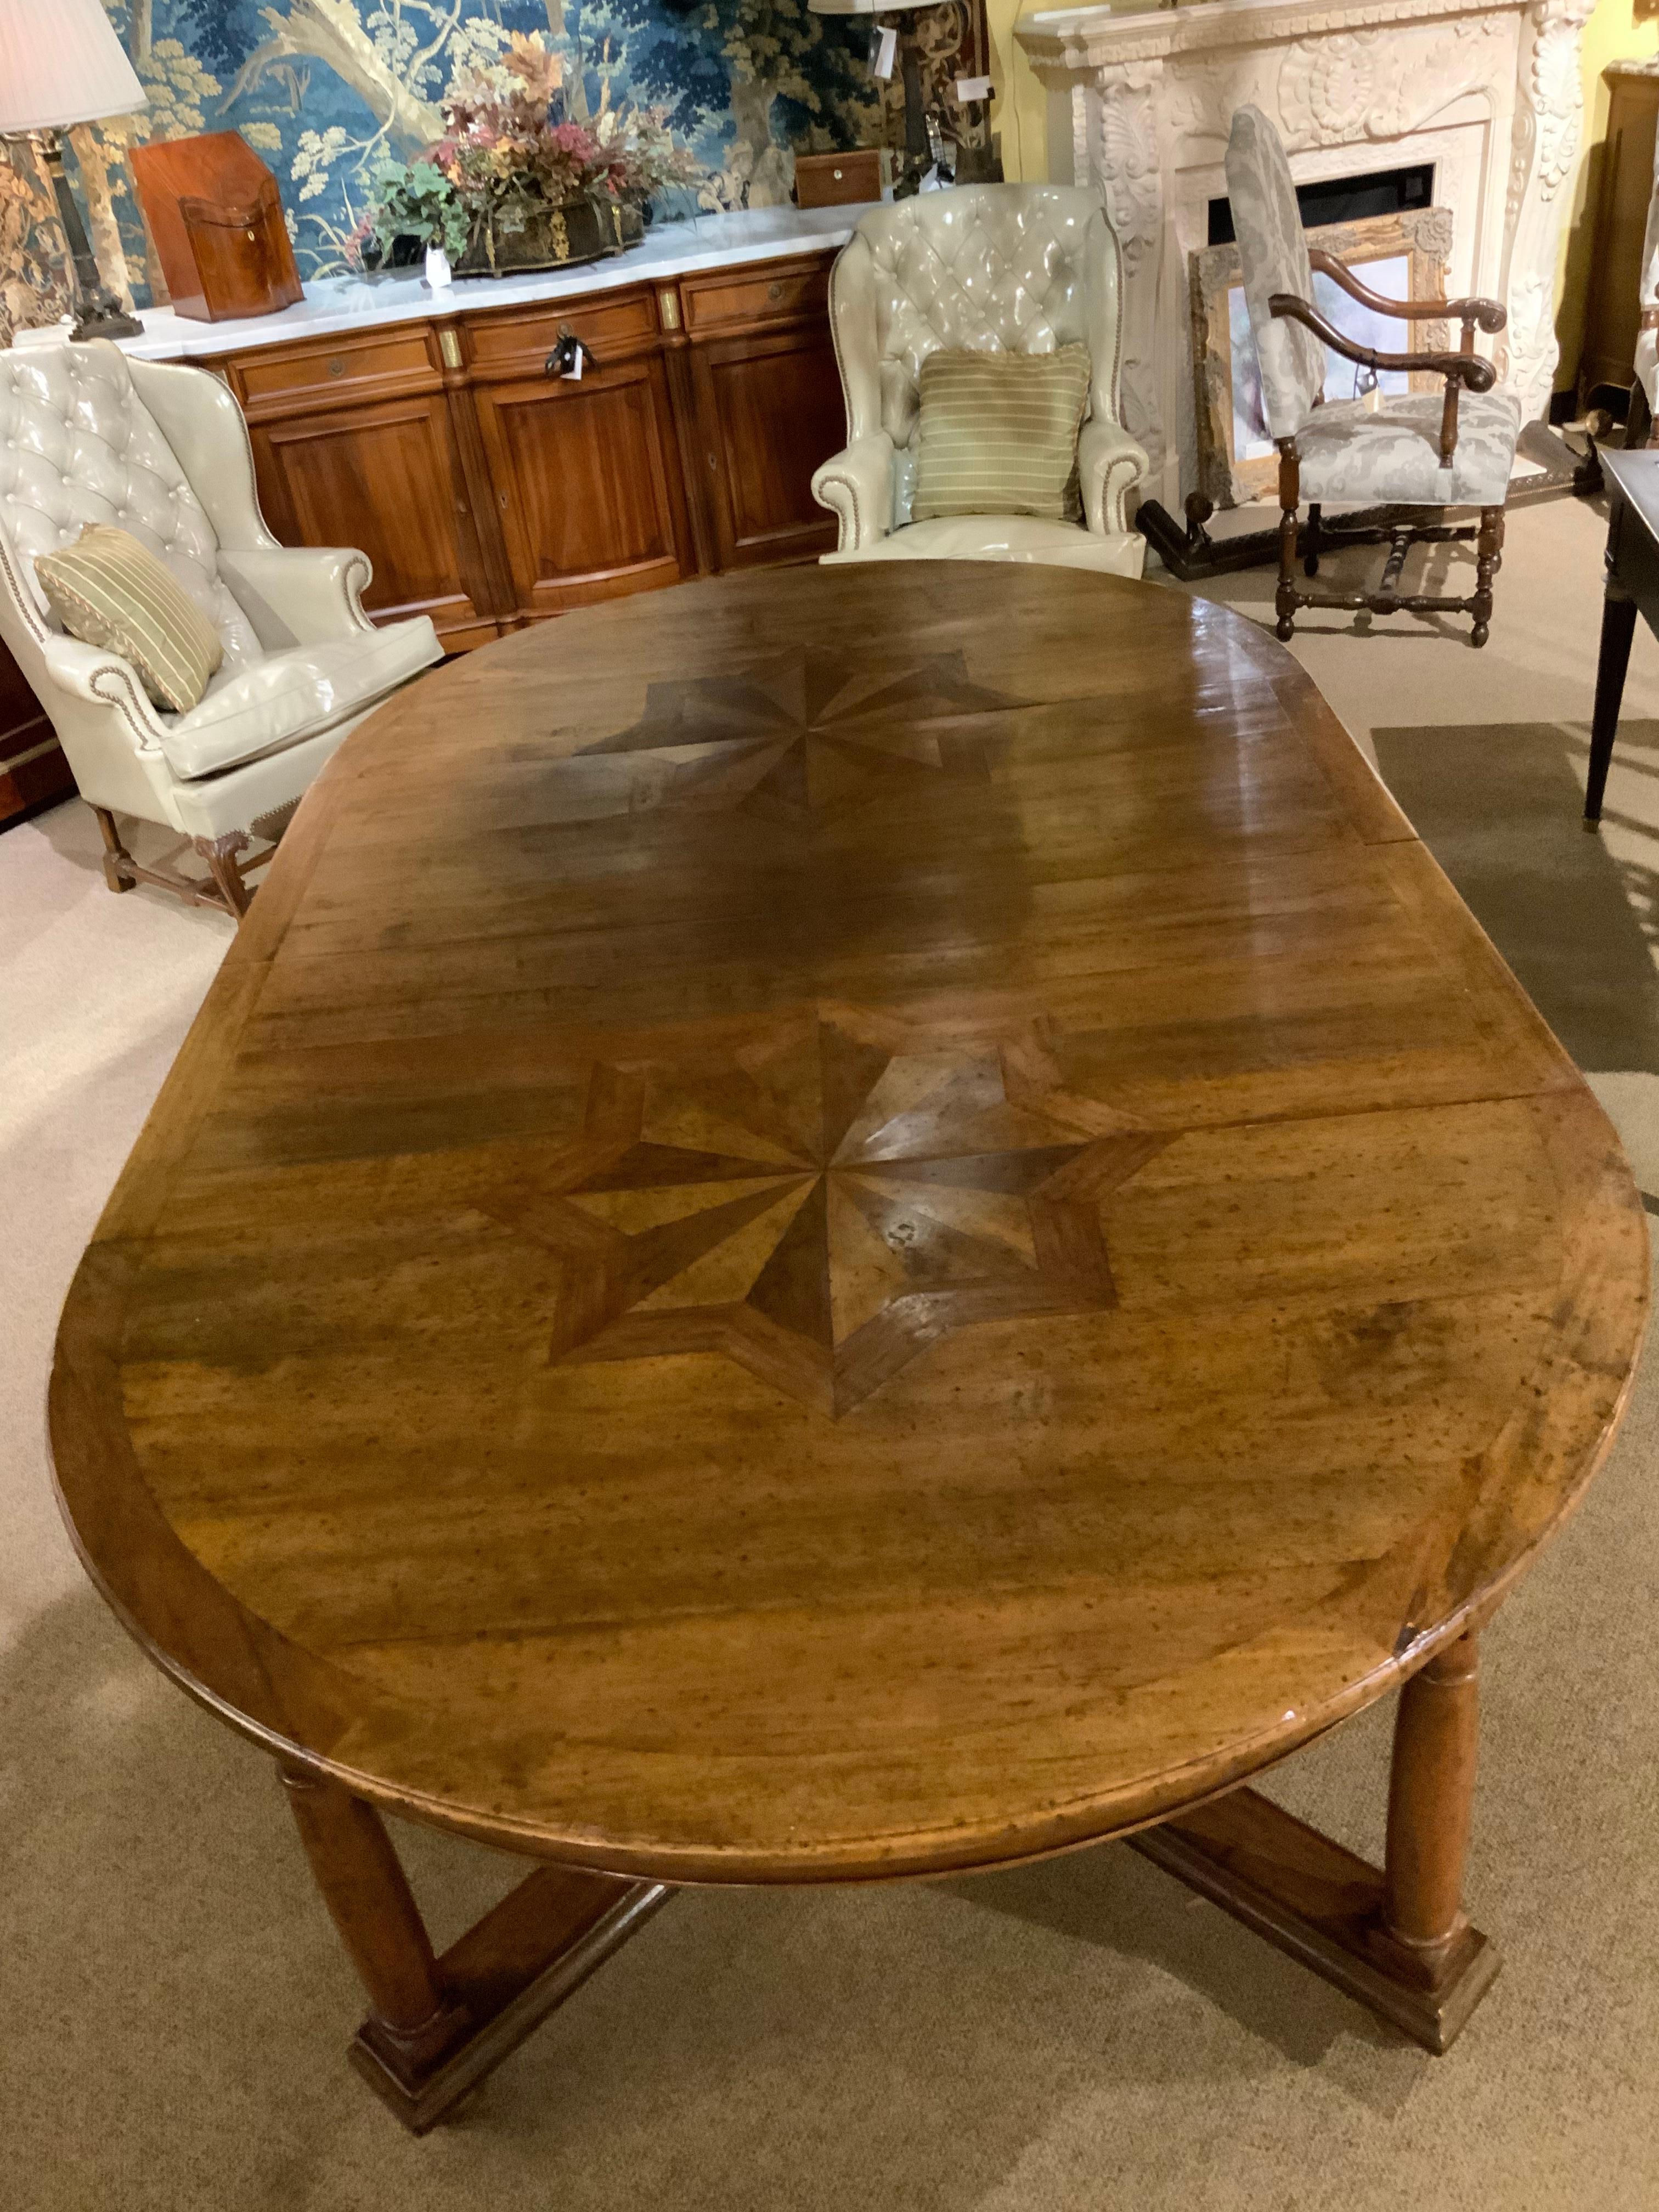 20th Century Handsome Oval Shaped Dining Table with Star Inlay in the Top, V-Shaped Stretcher